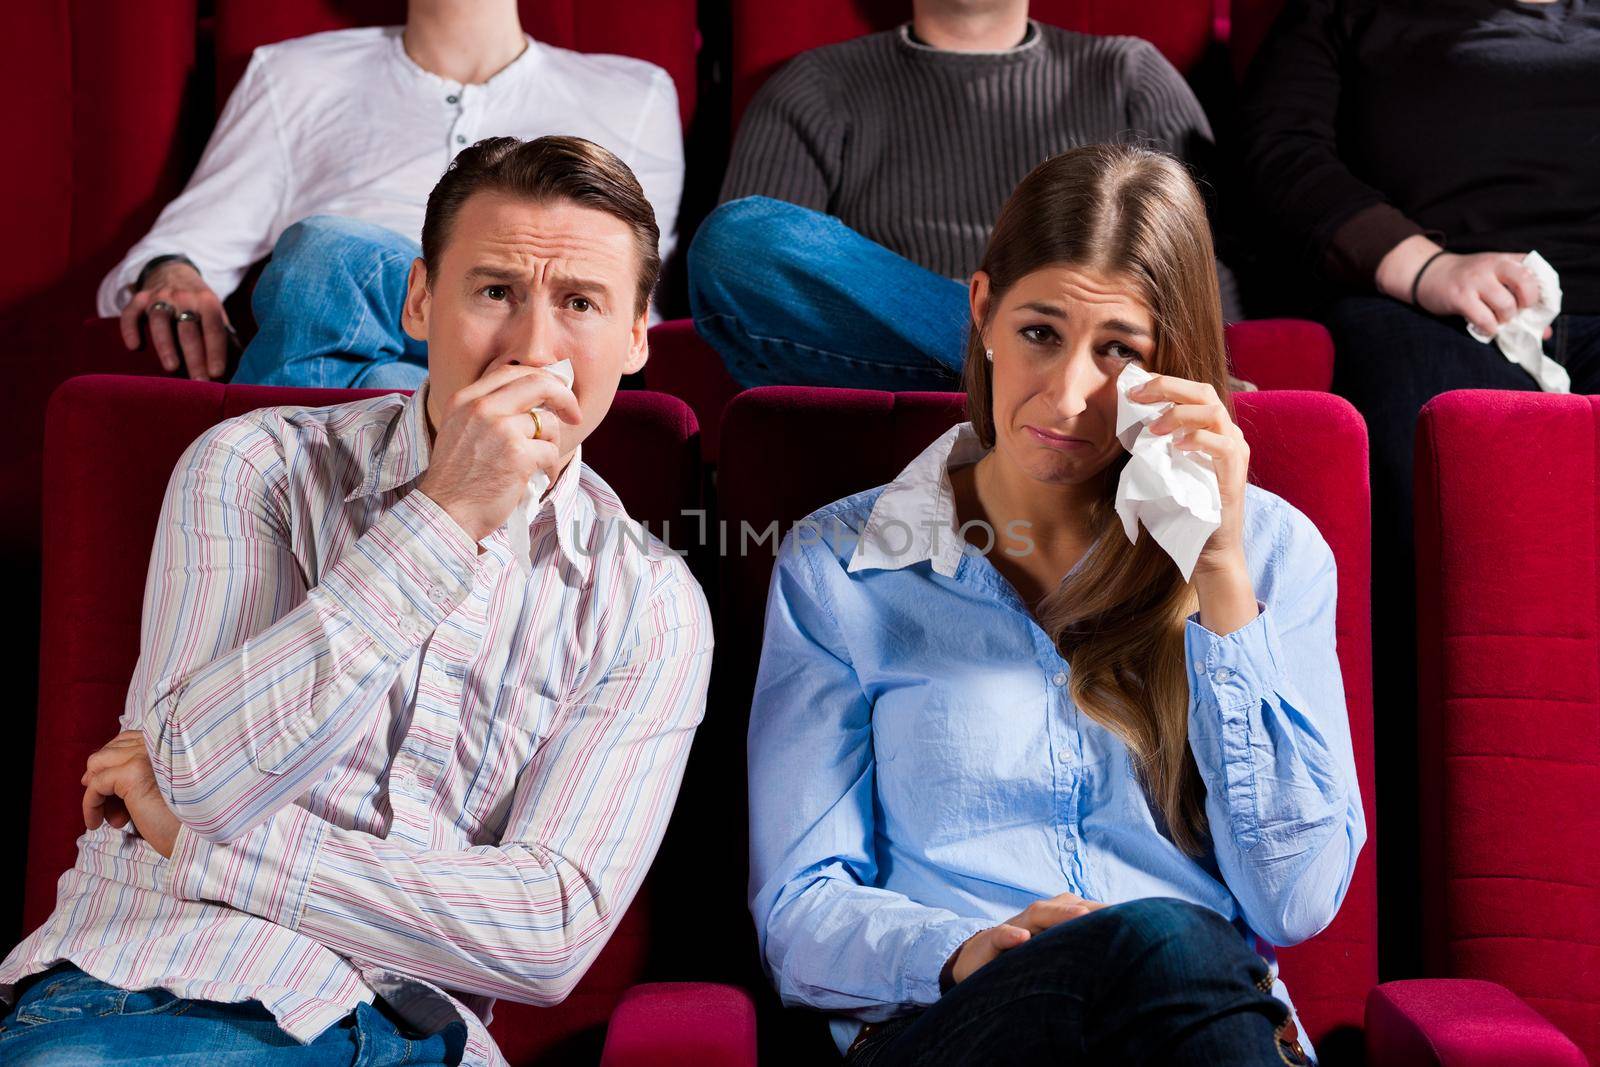 Couple and other people, probably friends, in cinema watching a movie, it seems to be a sad movie